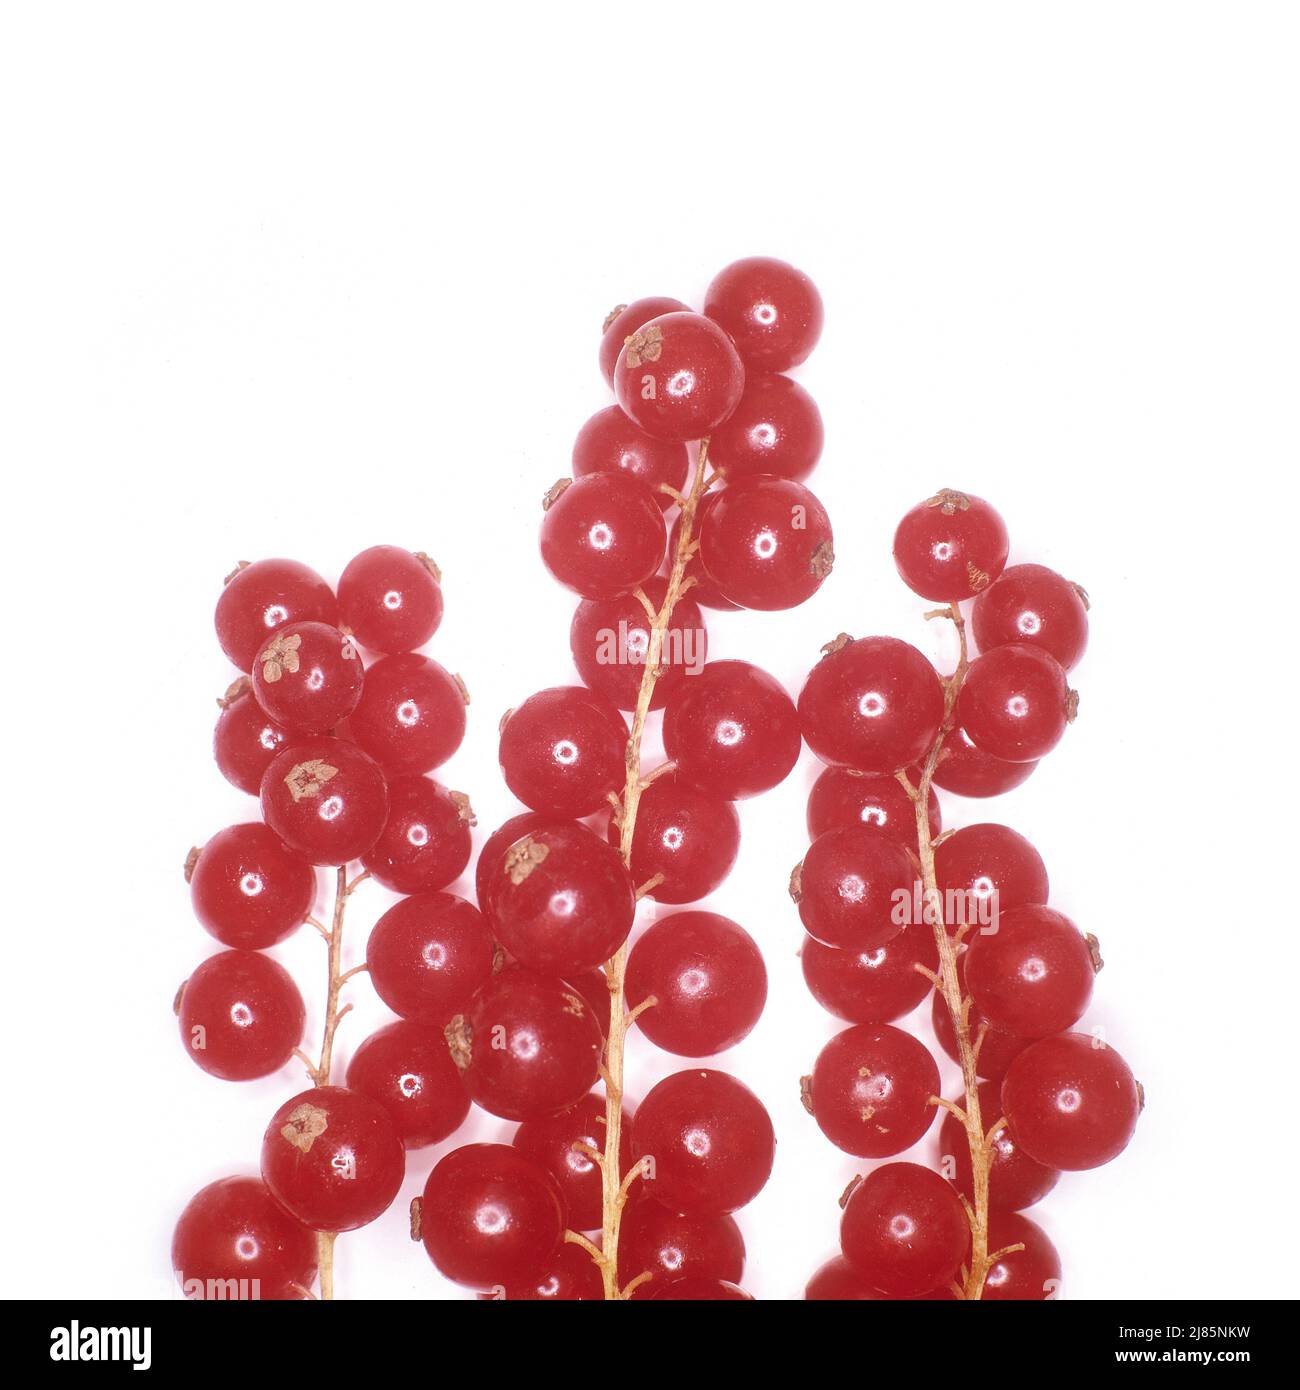 Red currants isolated on a white studio background. Stock Photo